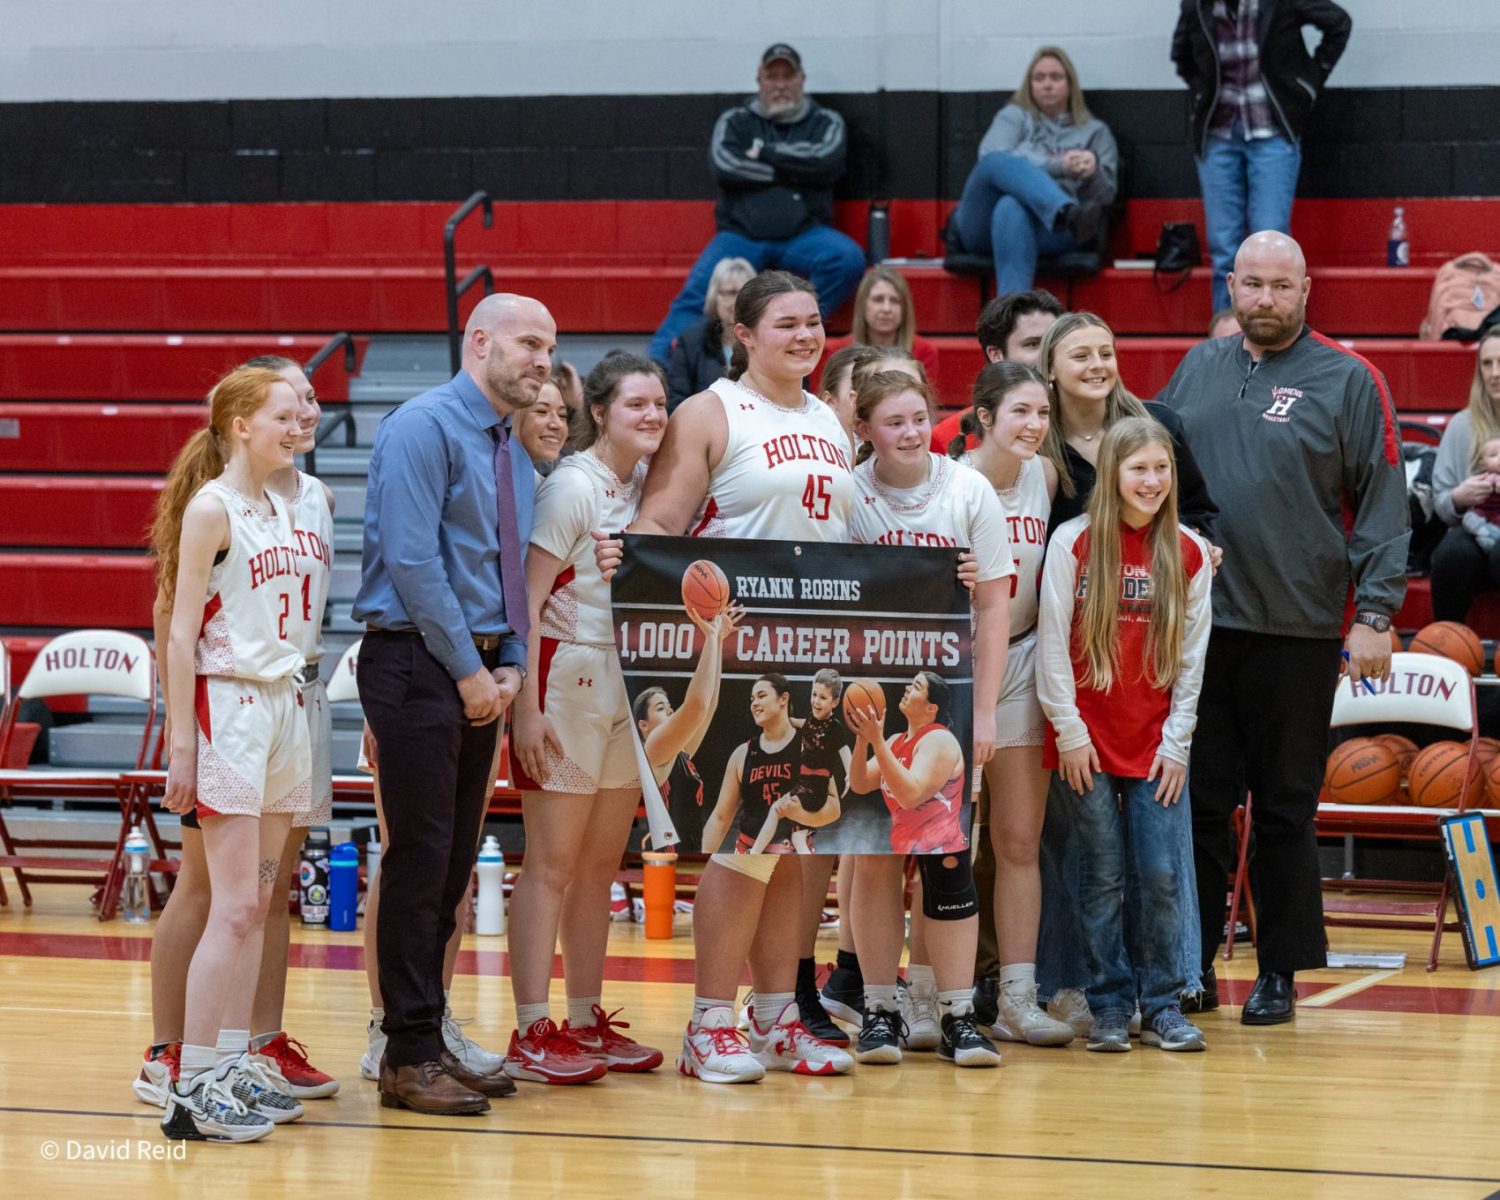 North Muskegon defeats Holton by double digits; Holton’s Robins surpasses 1,000-point mark